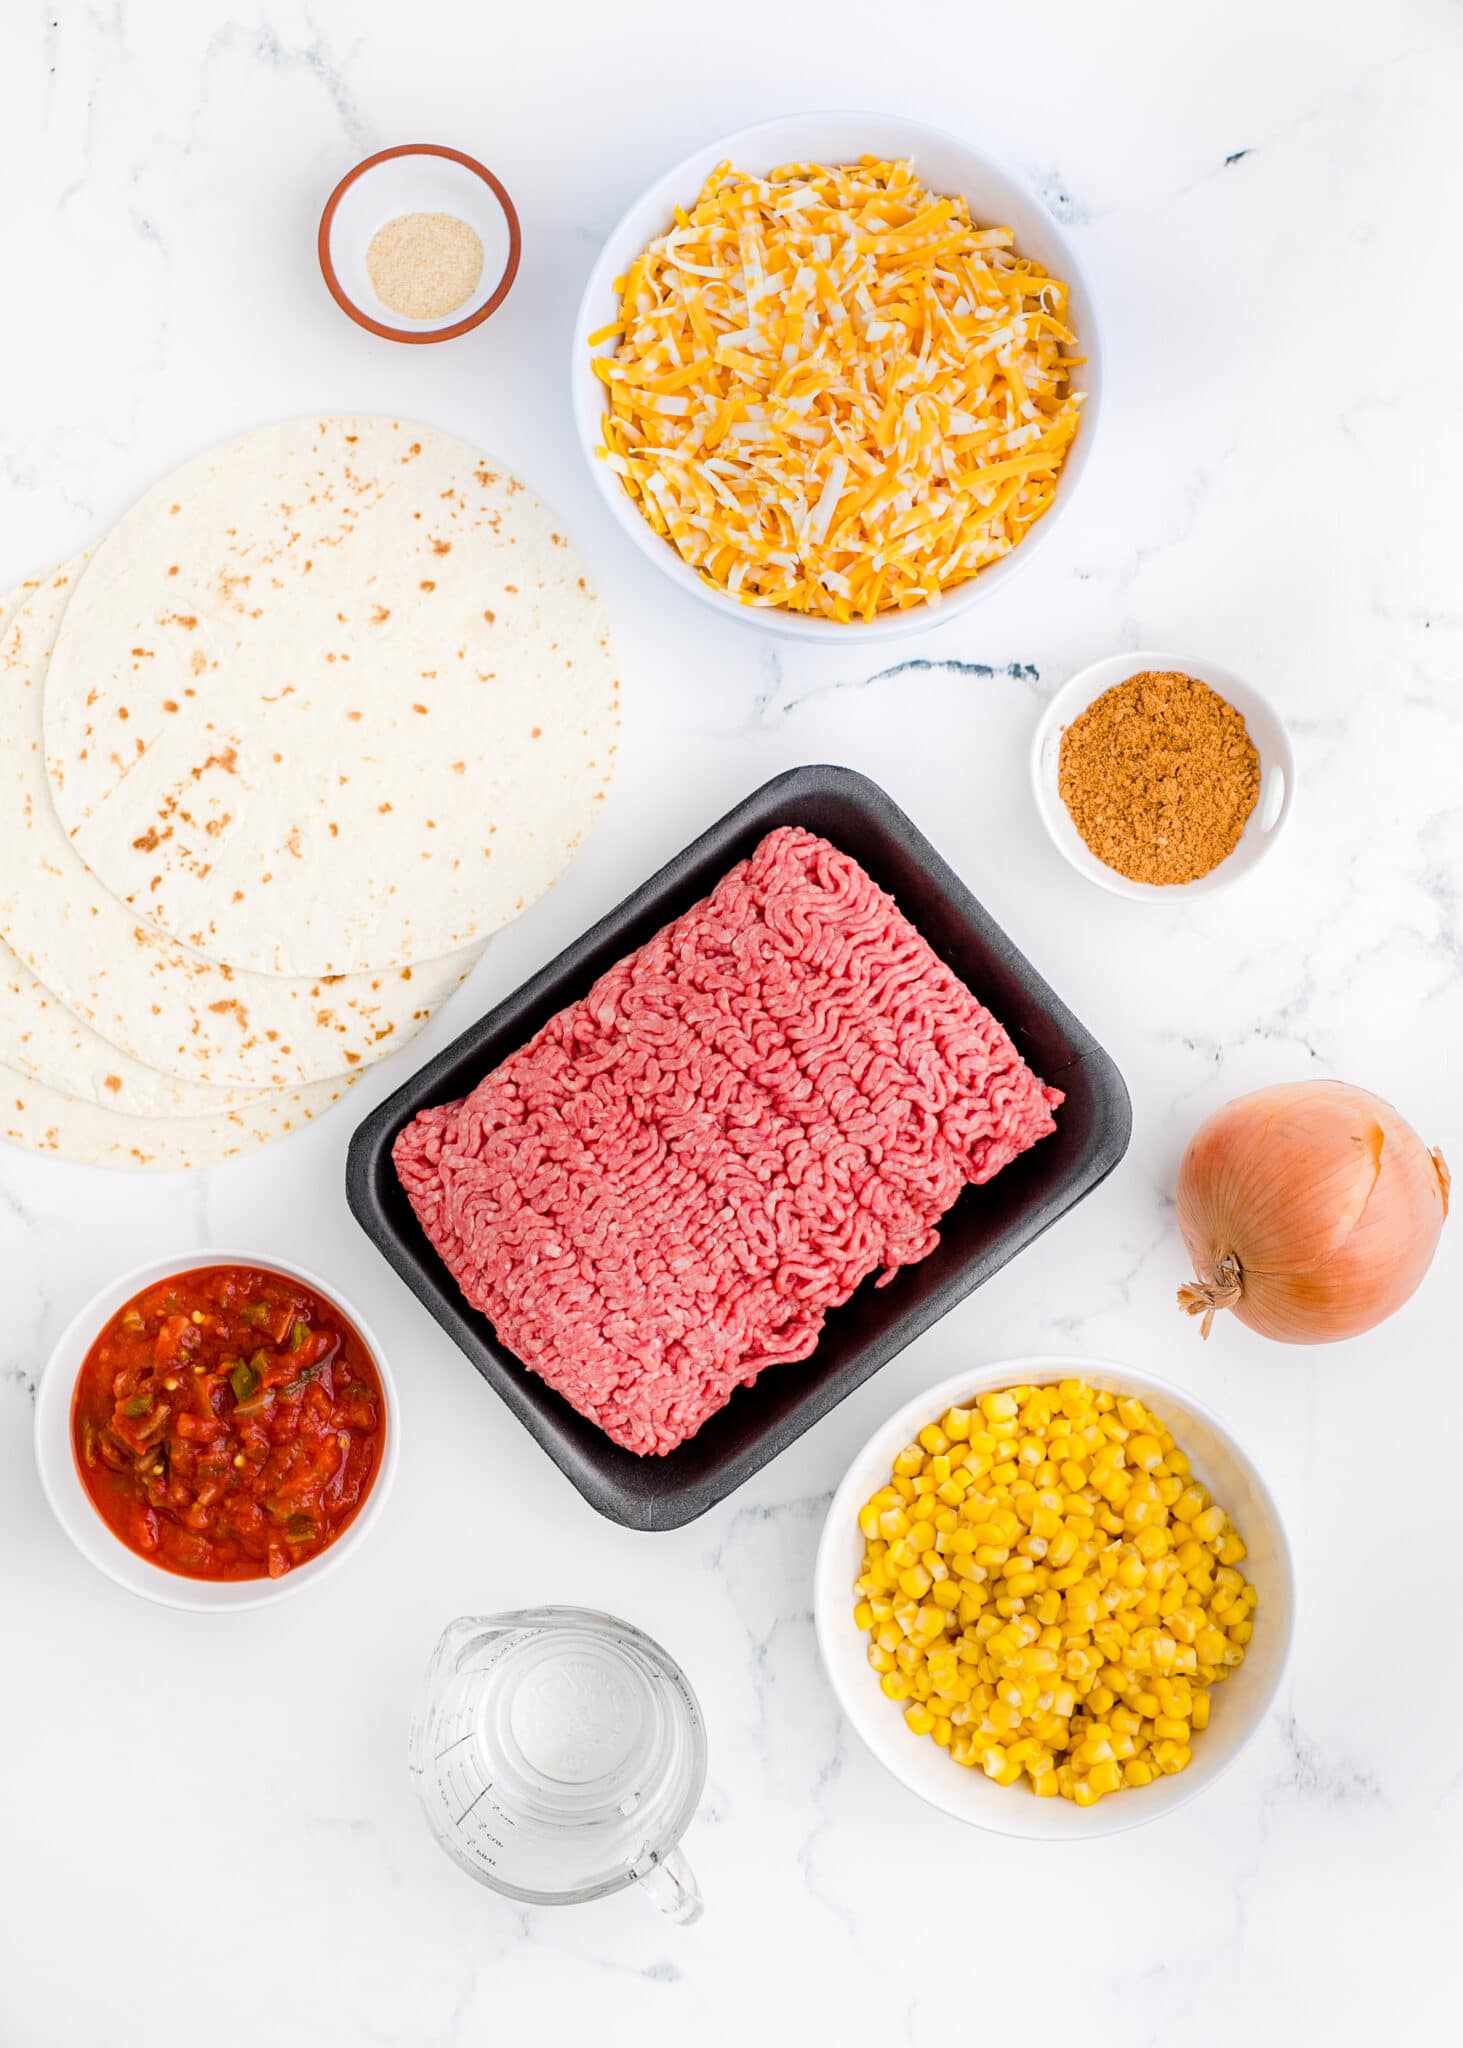 Clockwise from top: Garlic powder, cheese, taco seasoning, onion, corn, water, salsa, tortillas. Center: A package of ground beef.